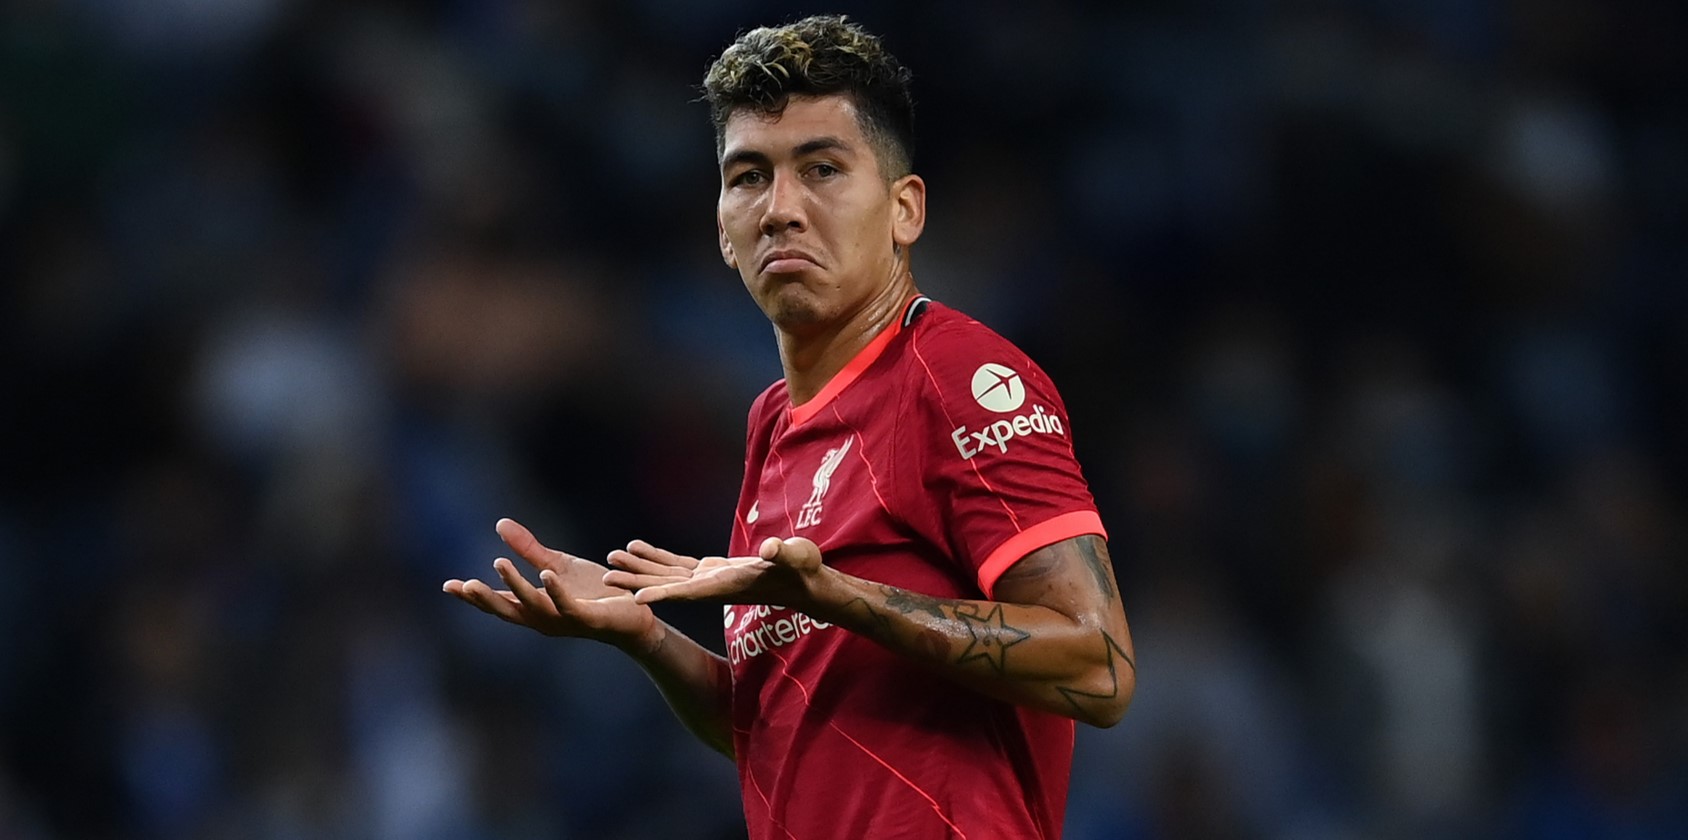 Bobby Firmino sidelined with ‘a serious hamstring injury’, confirms Jurgen Klopp in pre-West Ham press conference